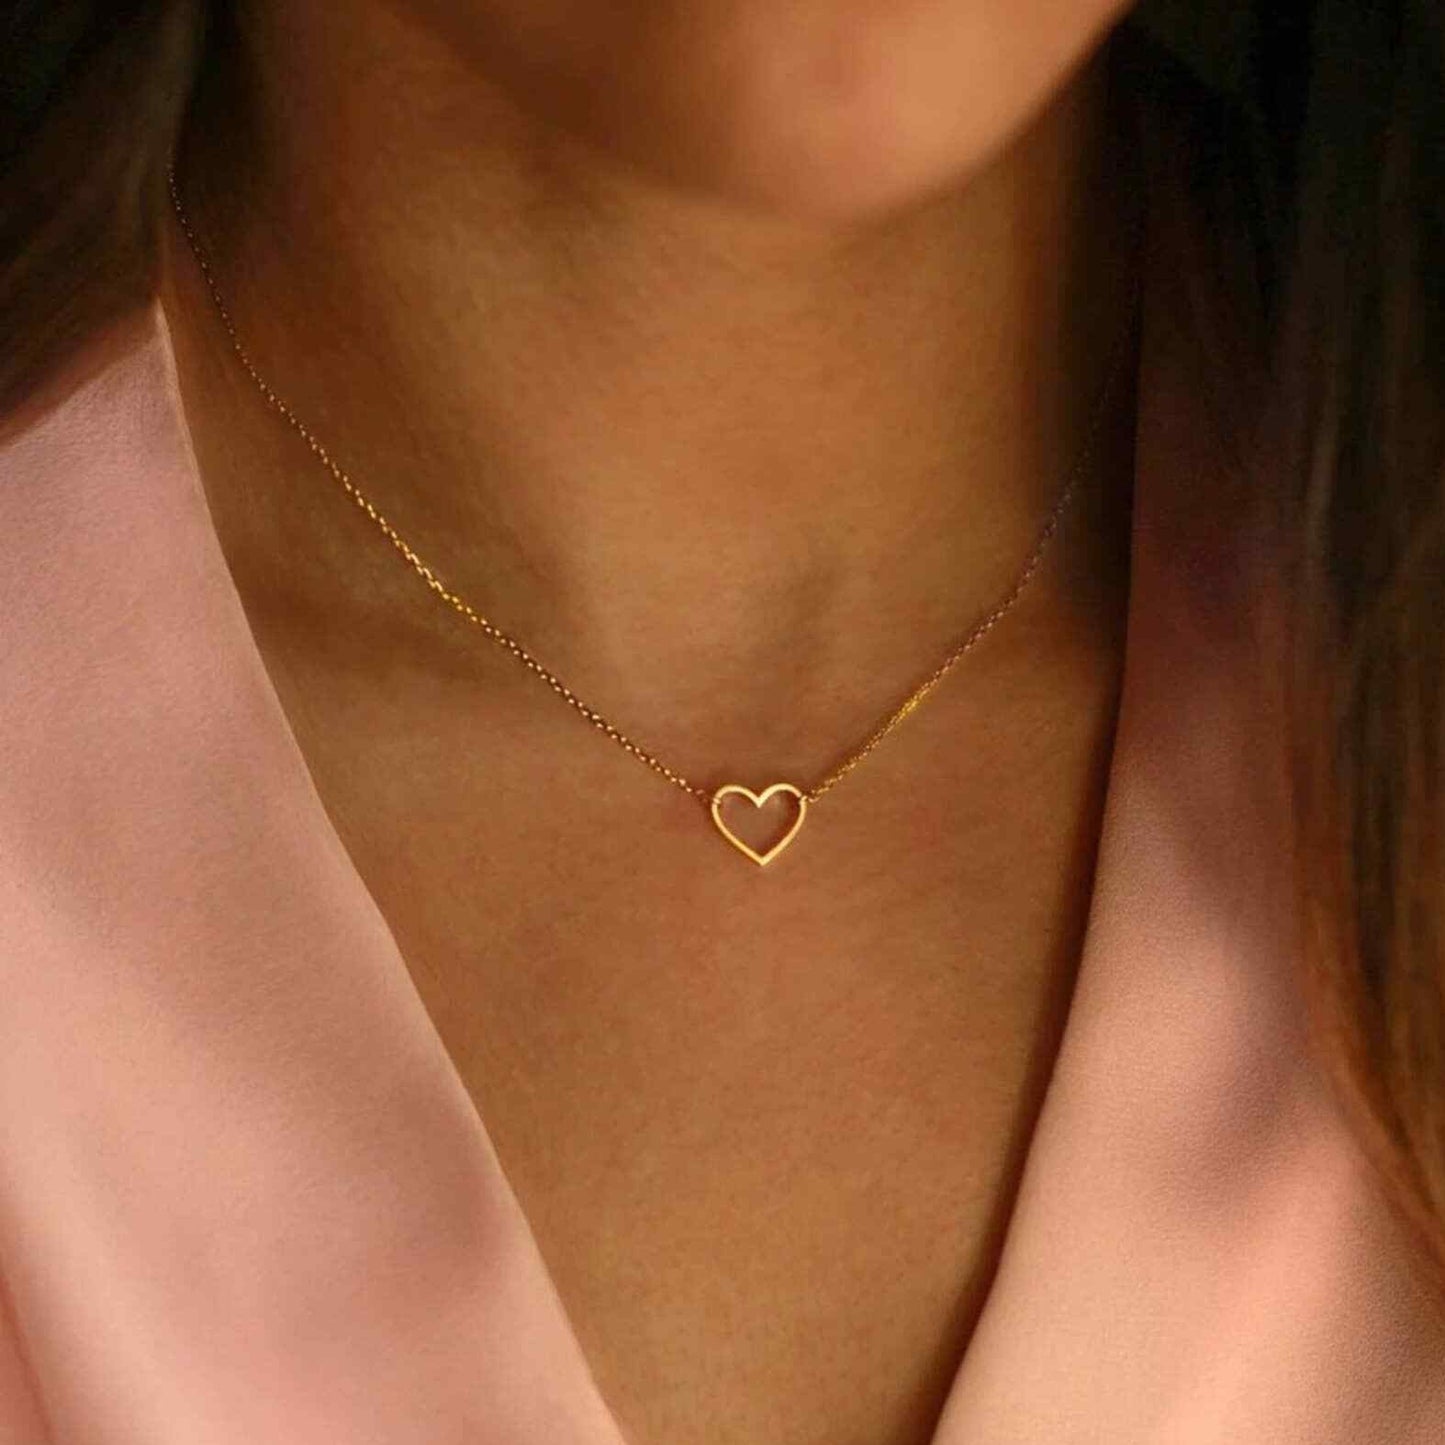 Amazon.com: 14k Solid Gold Puffed Heart Necklace for Women | Dainty  Polished Heart Pendant Necklace | Mini Heart Necklaces | Love Charm Jewelry  | Yellow, White Or Rose Gold | Handmade Anniversary,